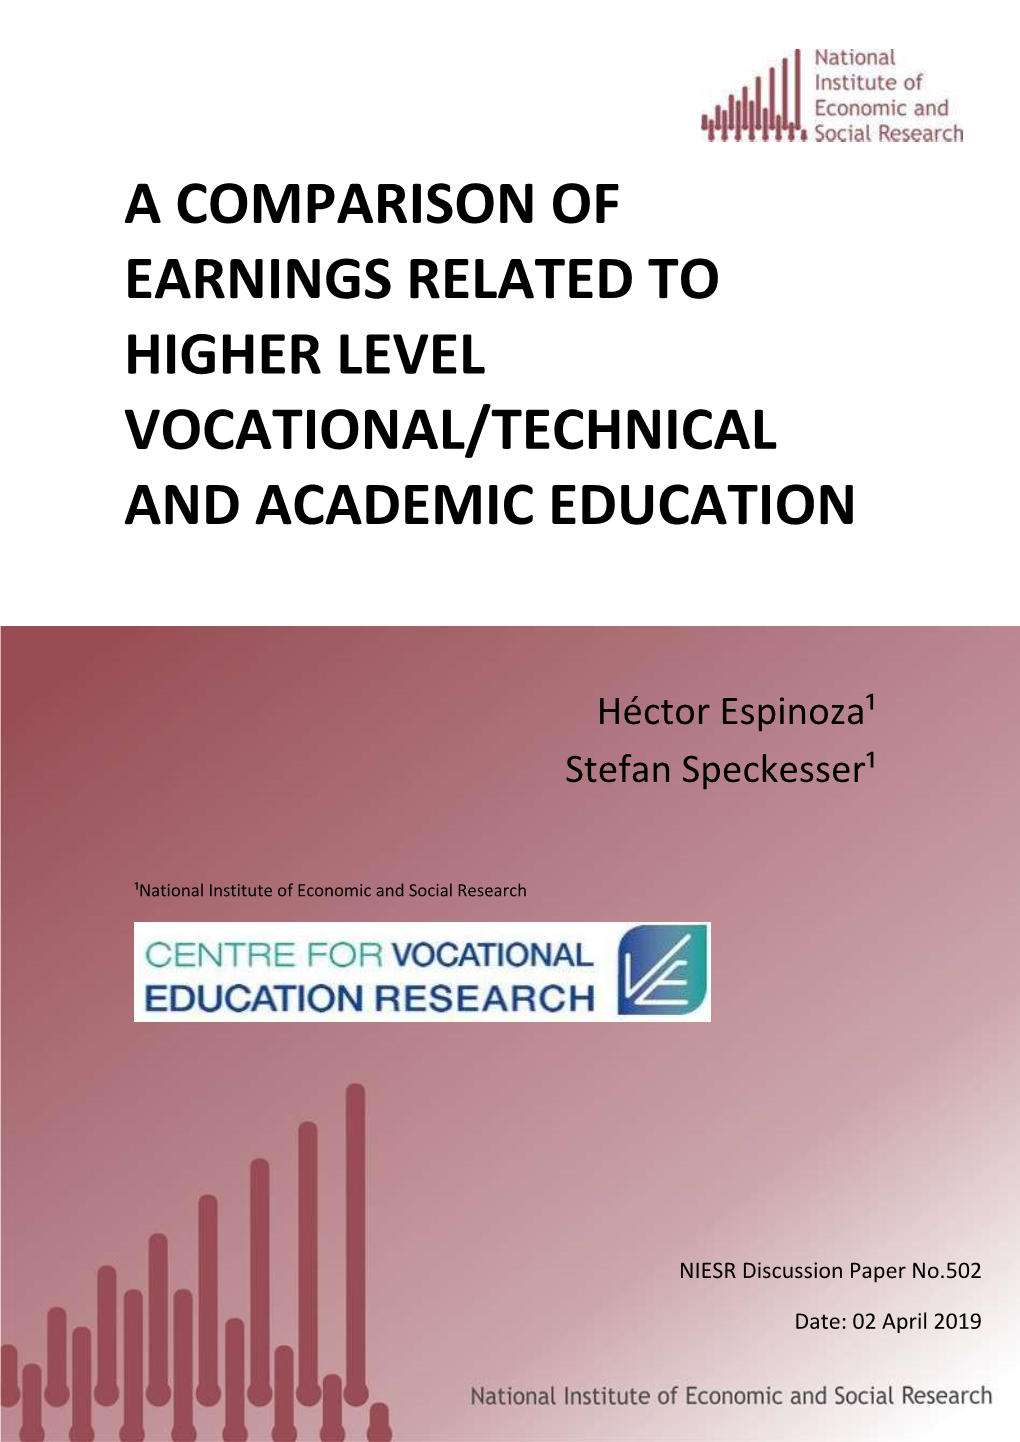 A Comparison of Earnings Related to Higher Level Vocational/Technical and Academic Education